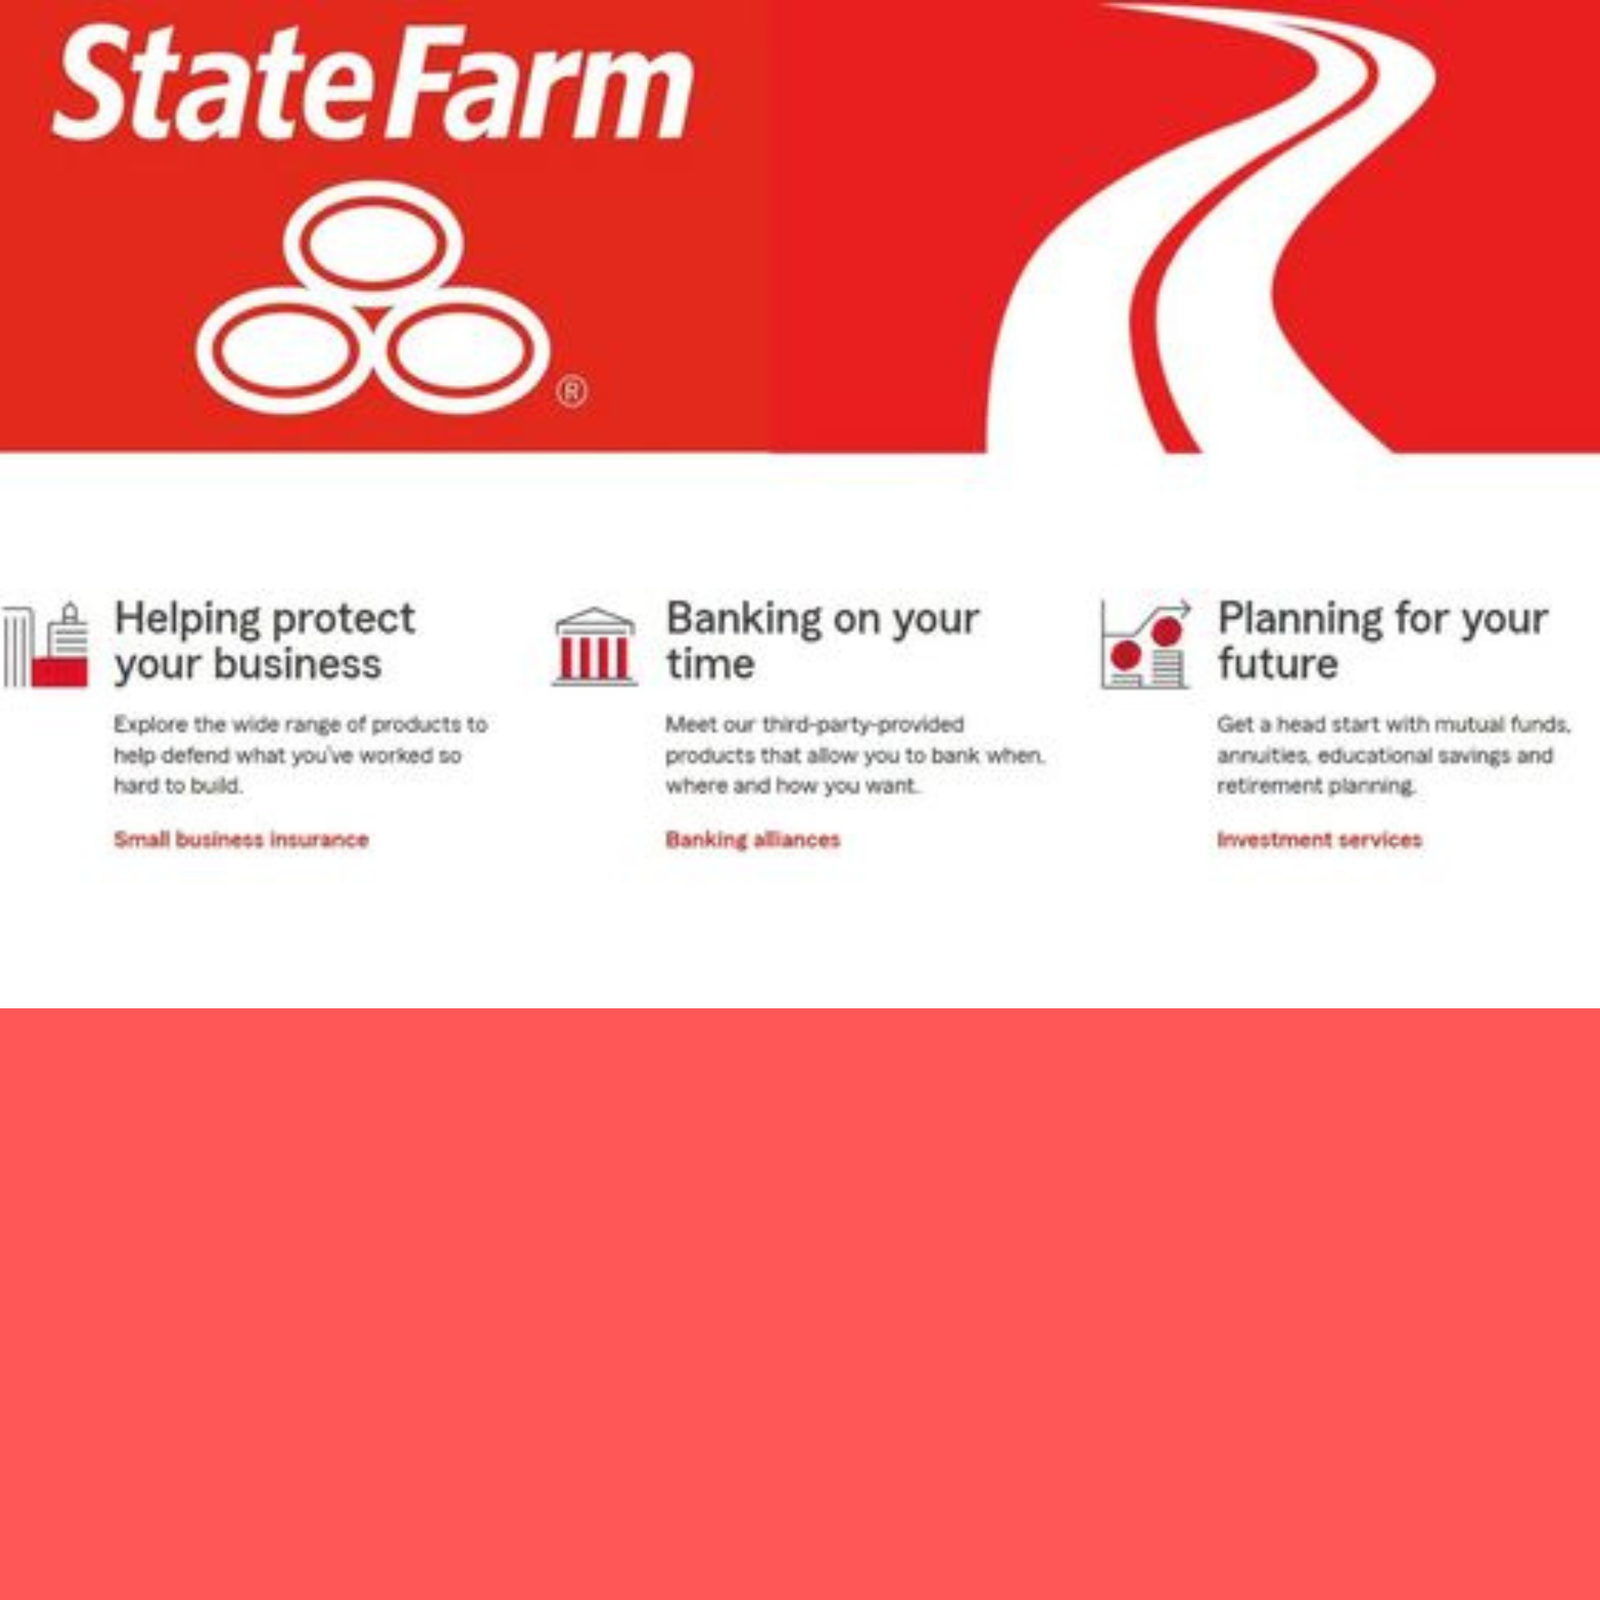 Does State Farm offer travel insurance?